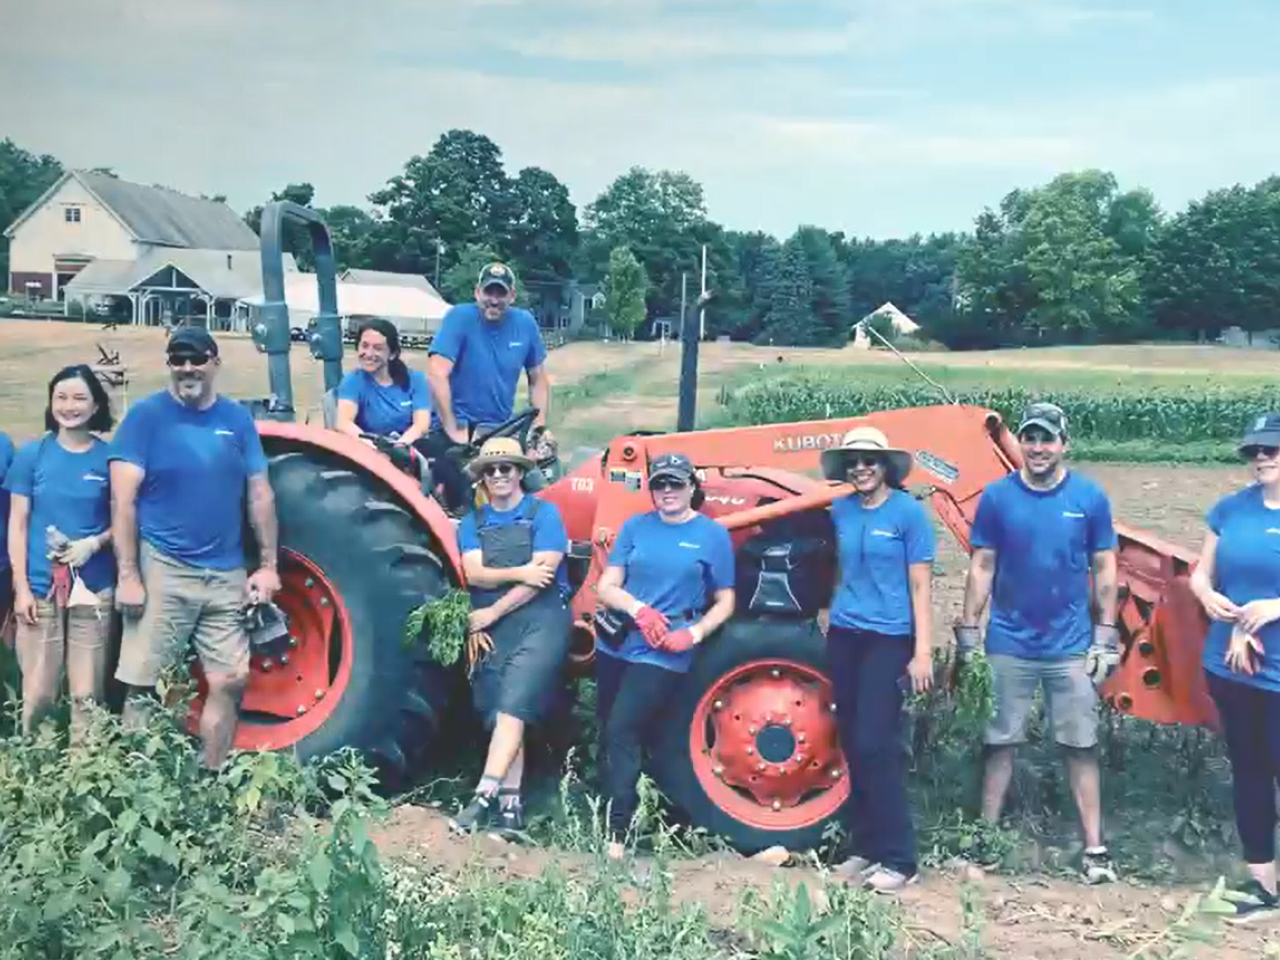 A group of people standing next to or on a large farm tractor in a field of growing crops. A home behind them. They're all wearing a blue shirt with "Alkermes" on it.